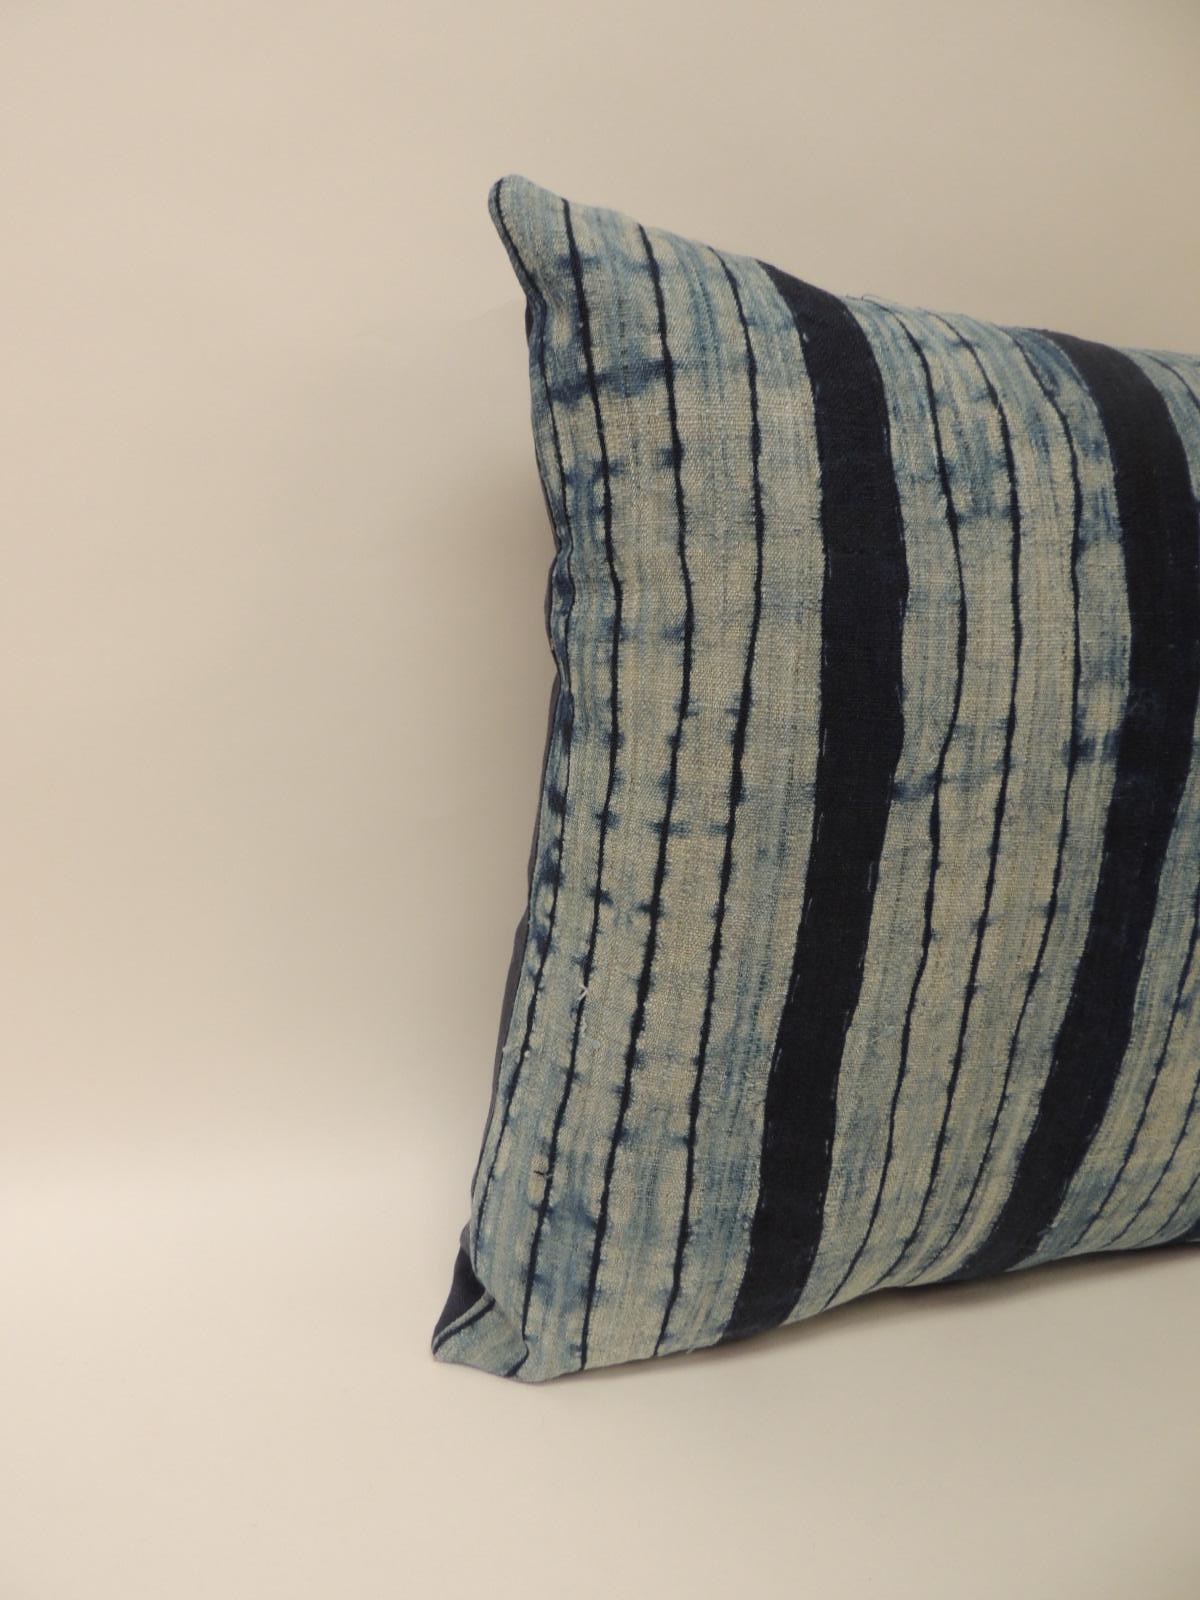 Vintage Shibori stripe blue Asian decorative pillow. Square indigo stripe homespun hemp textile with dark blue linen backing.
Decorative pillow handcrafted and designed in the U.S. 
Throw bolster pillow with a custom made pillow insert and closure